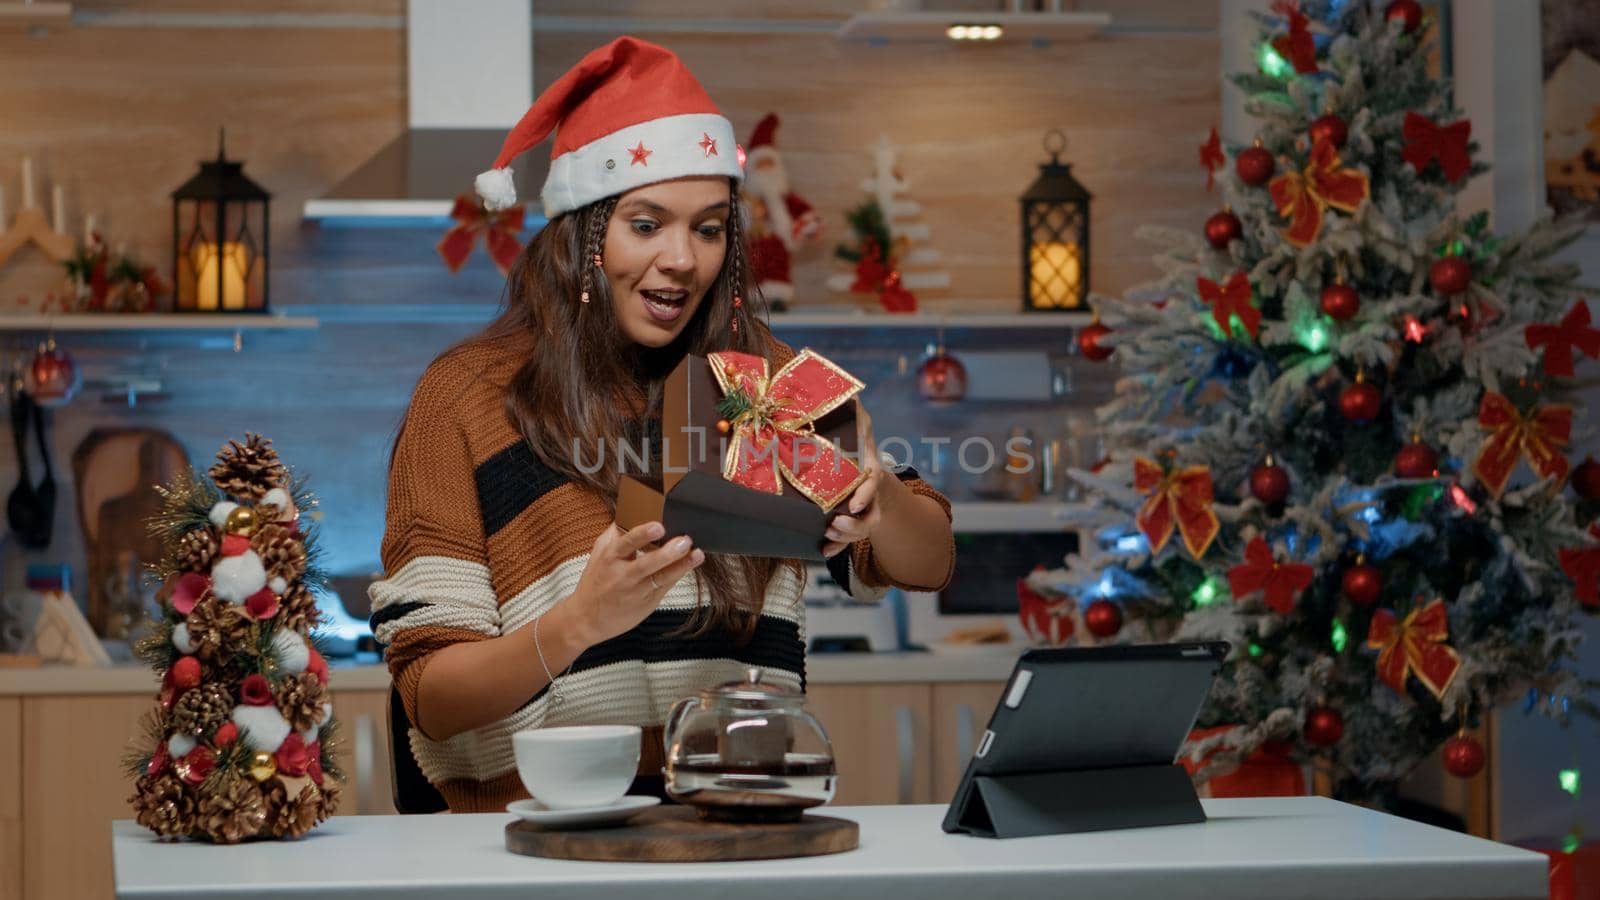 Smiling woman opening gift from friends on video call by DCStudio